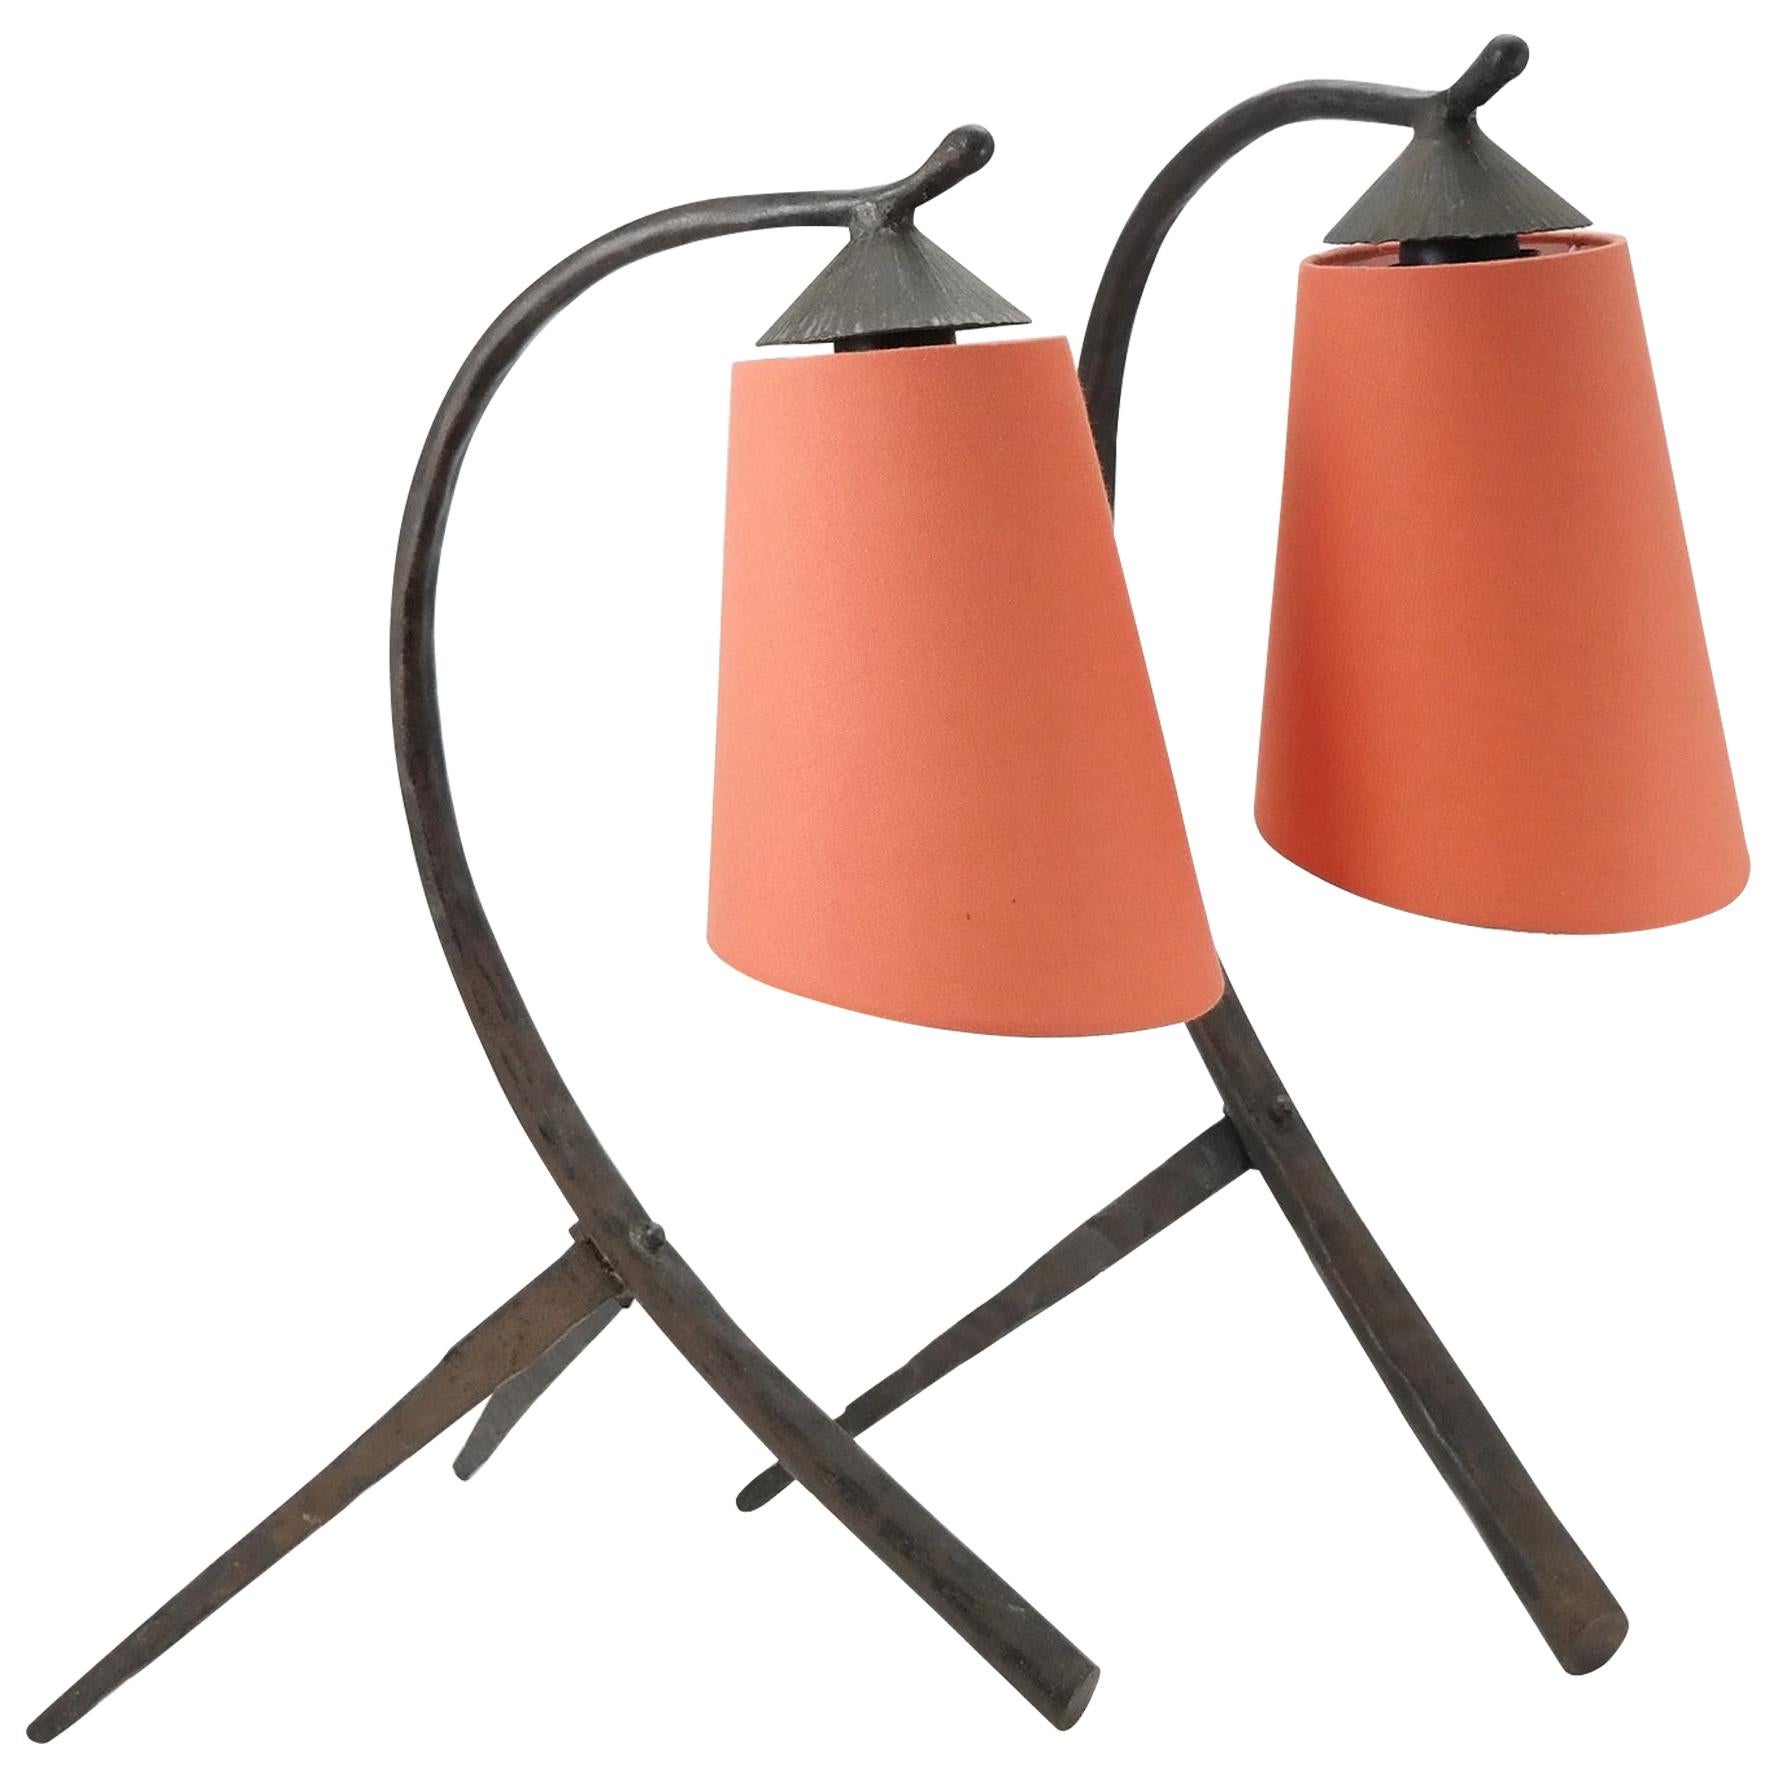 Pair of Midcentury Hammered Wrought Iron Table Lamp with Coral Lampshade, 1970